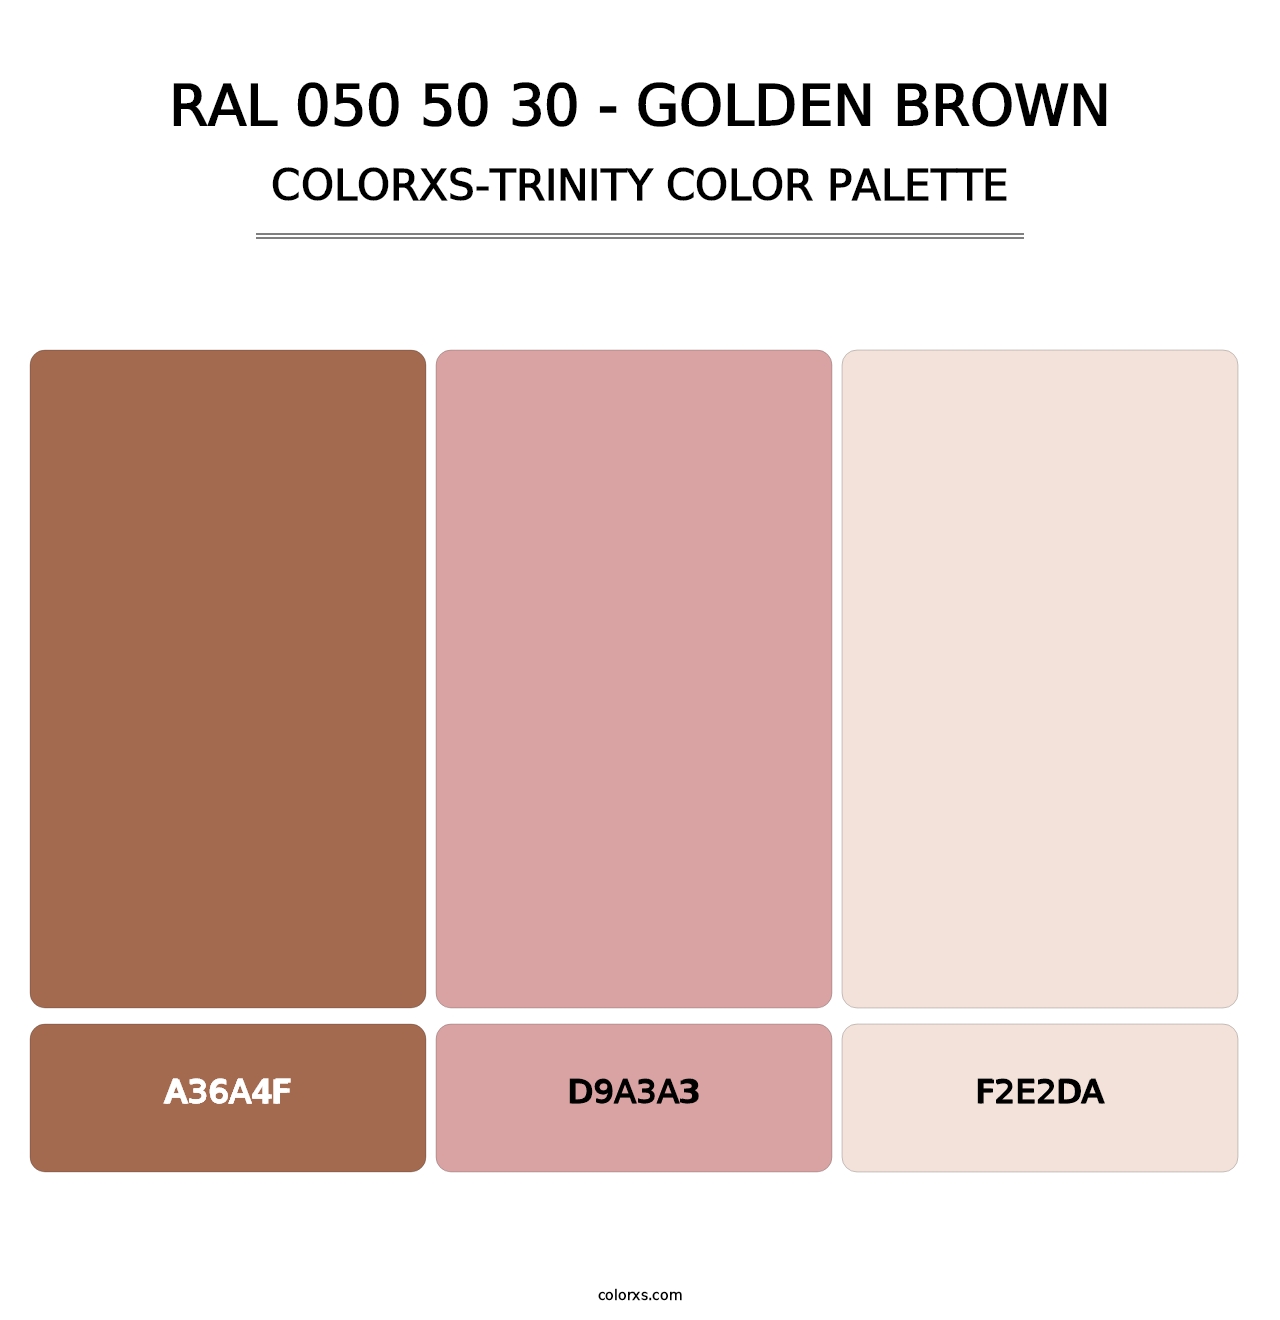 RAL 050 50 30 - Golden Brown - Colorxs Trinity Palette